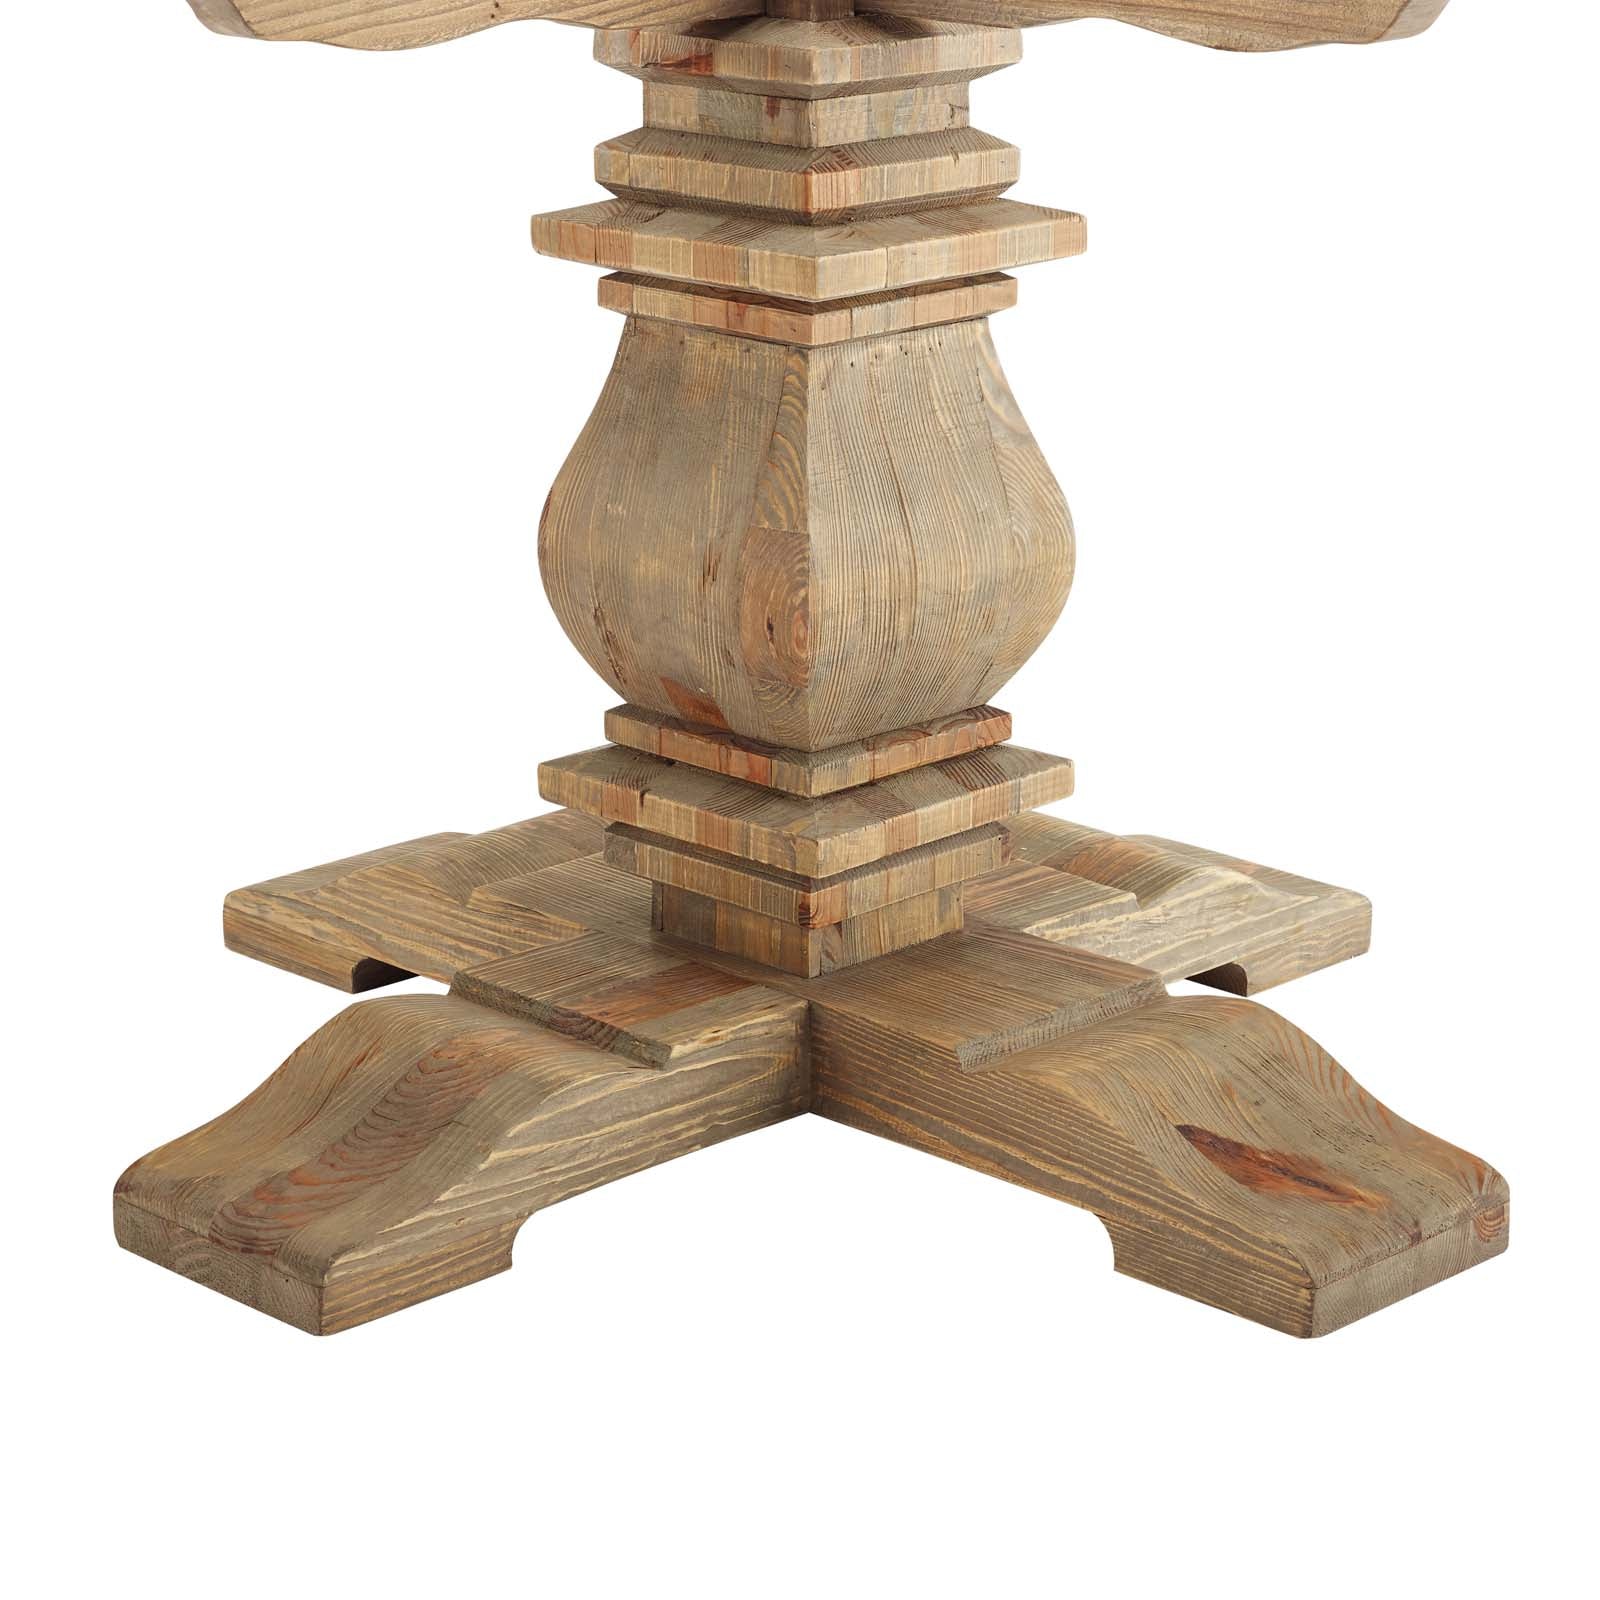 Column 47" Round Pine Wood Dining Table - East Shore Modern Home Furnishings